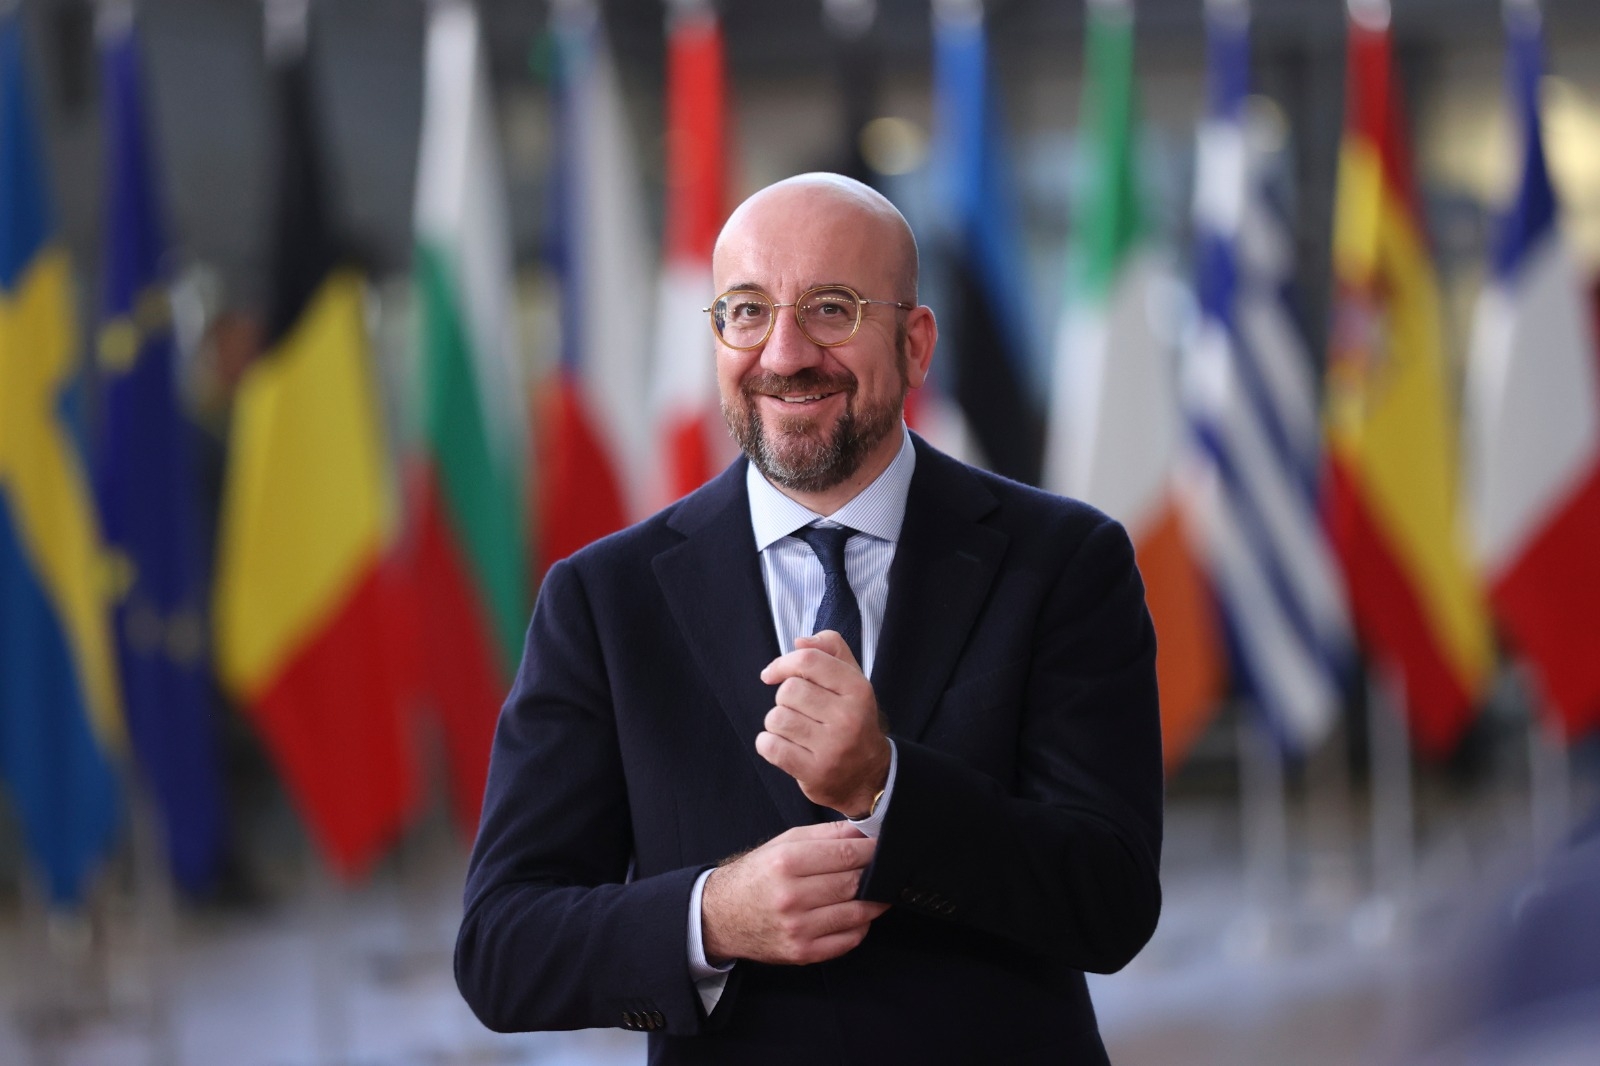 Charles Michel: The vote in the United States on aid to Ukraine is a clear signal to the Kremlin